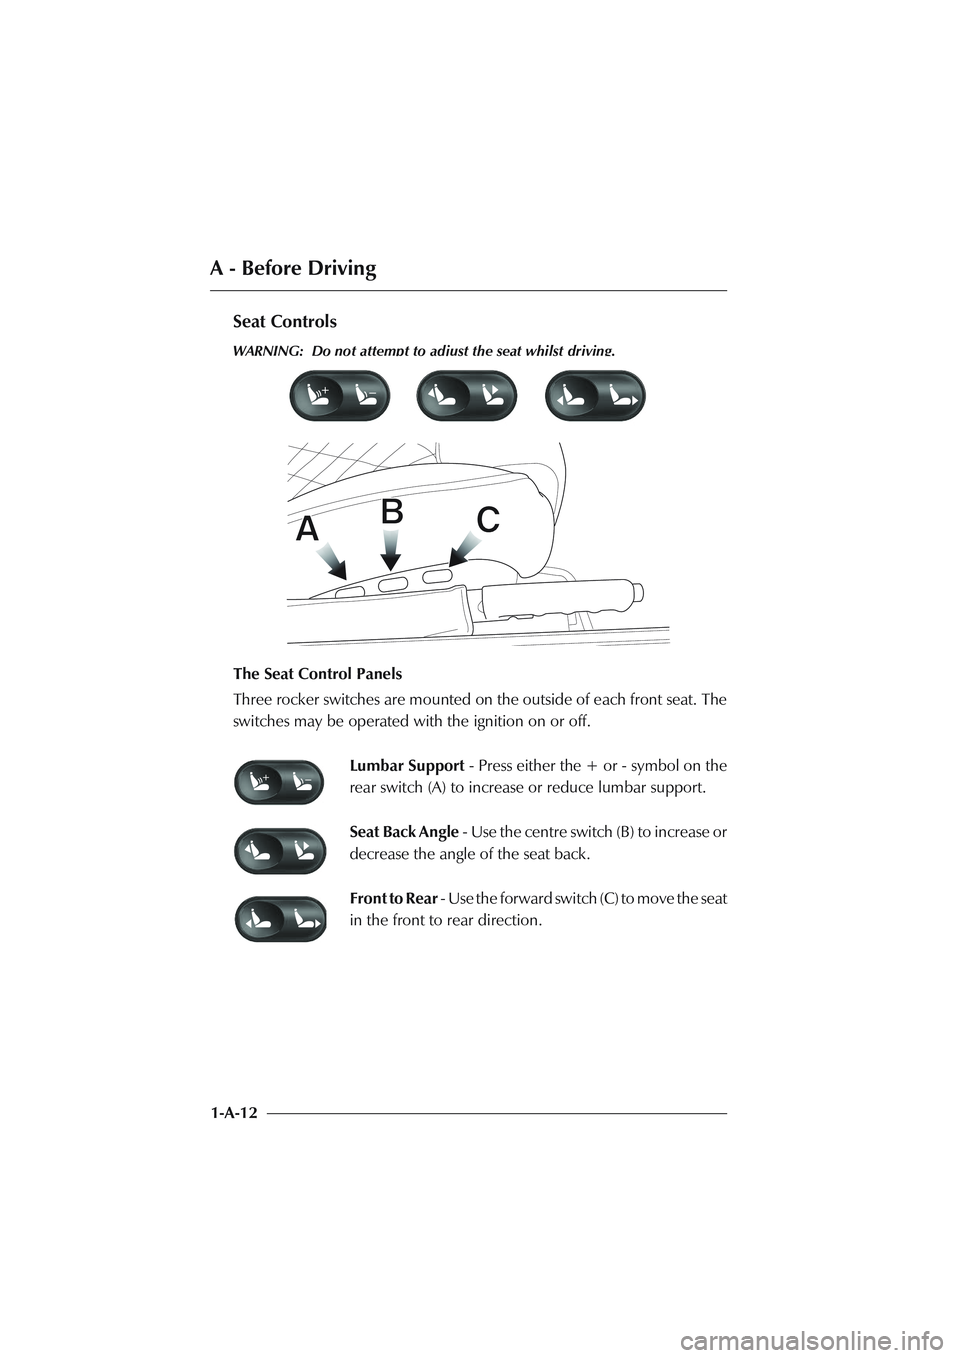 ASTON MARTIN DB AR1 Q 2003  Owners Guide A - Before Driving
1-A-12
Seat Controls
WARNING:  Do not attempt to adjust the seat whilst driving.
The Seat Control Panels
Three rocker switches are mounted on the outside of each front seat. The
swi